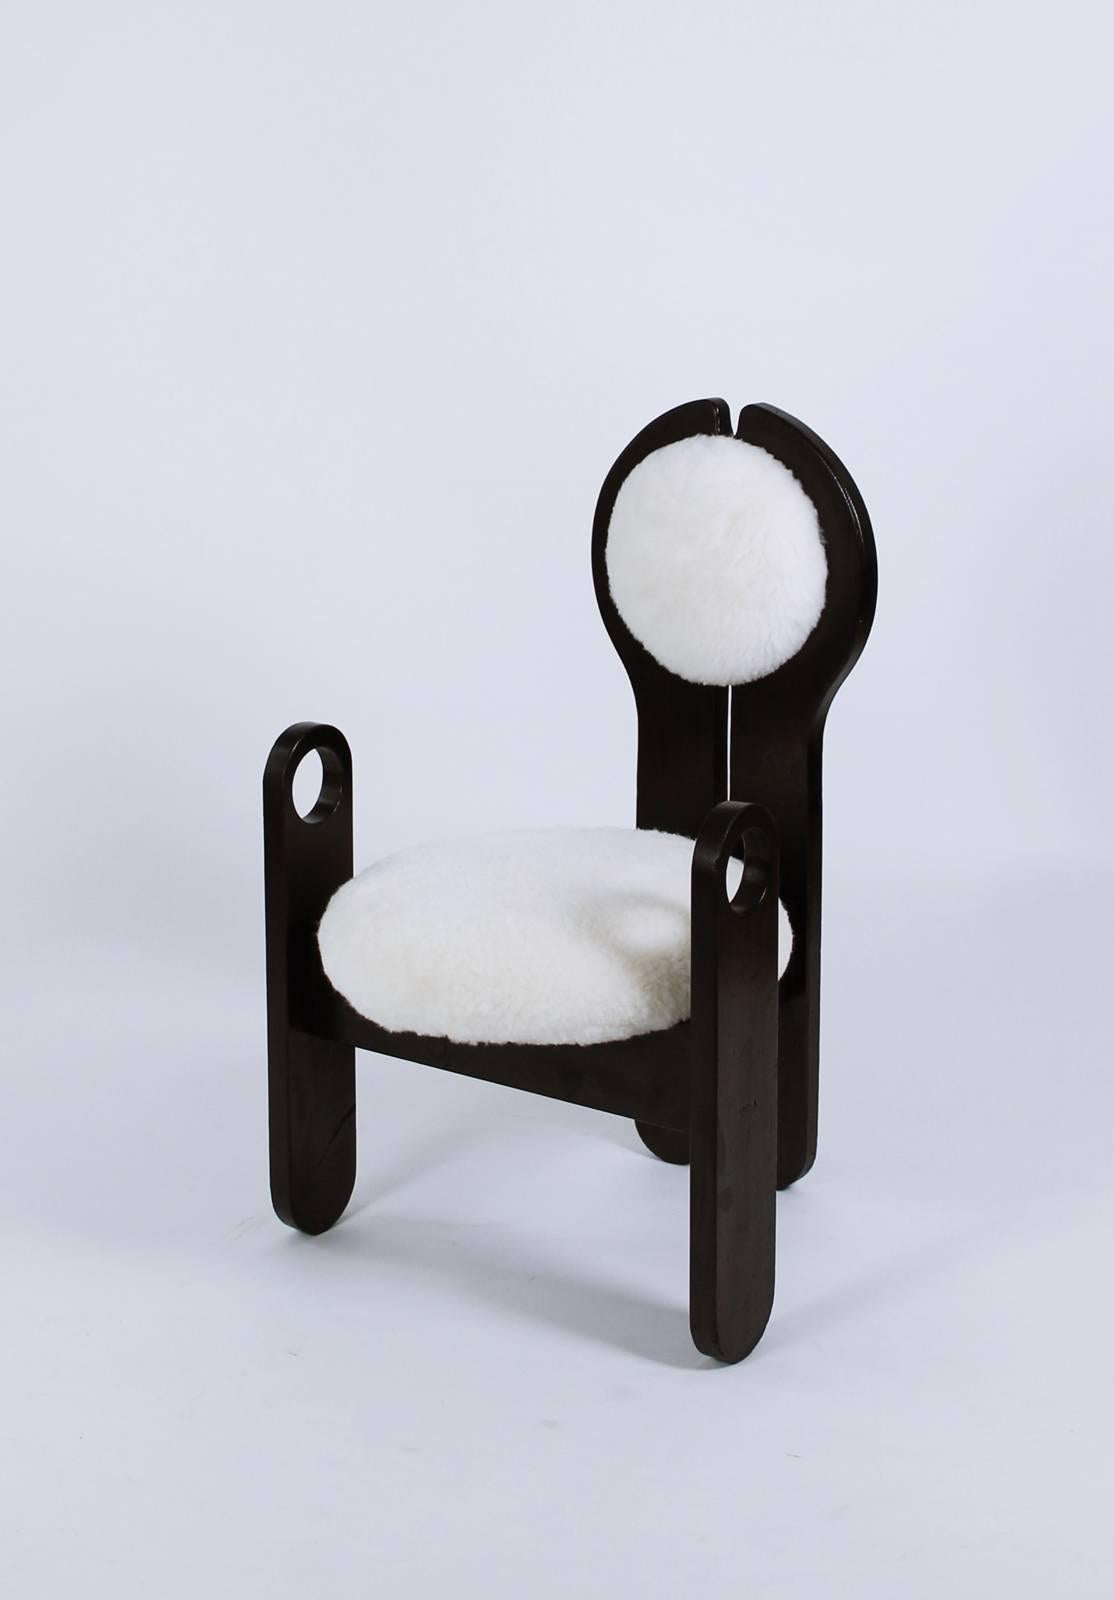 Unique and original form design piece from Hungary, 1980s. Very organic pistil-like shape with unique armrest. Seat and back upholstered in sheepskin
Overall, this rare chair has a great character.